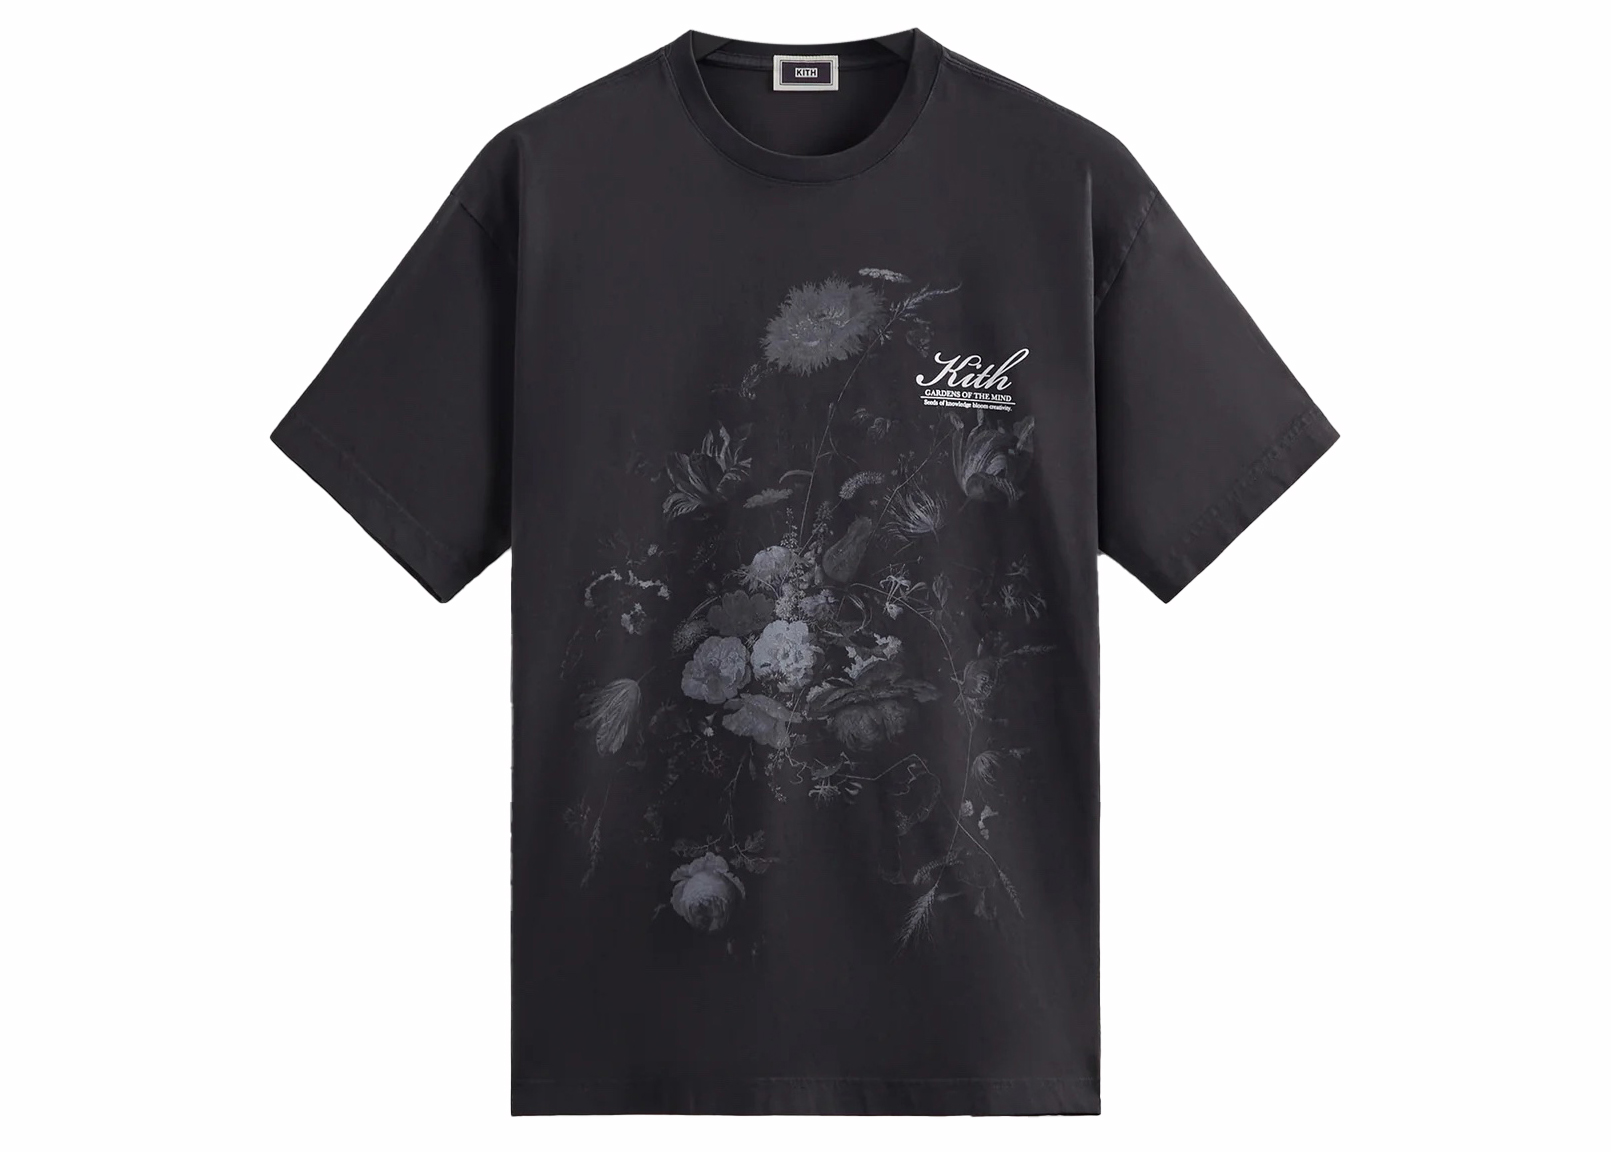 KITH GARDENS OF THE MIND Tシャツ - Tシャツ/カットソー(半袖/袖なし)